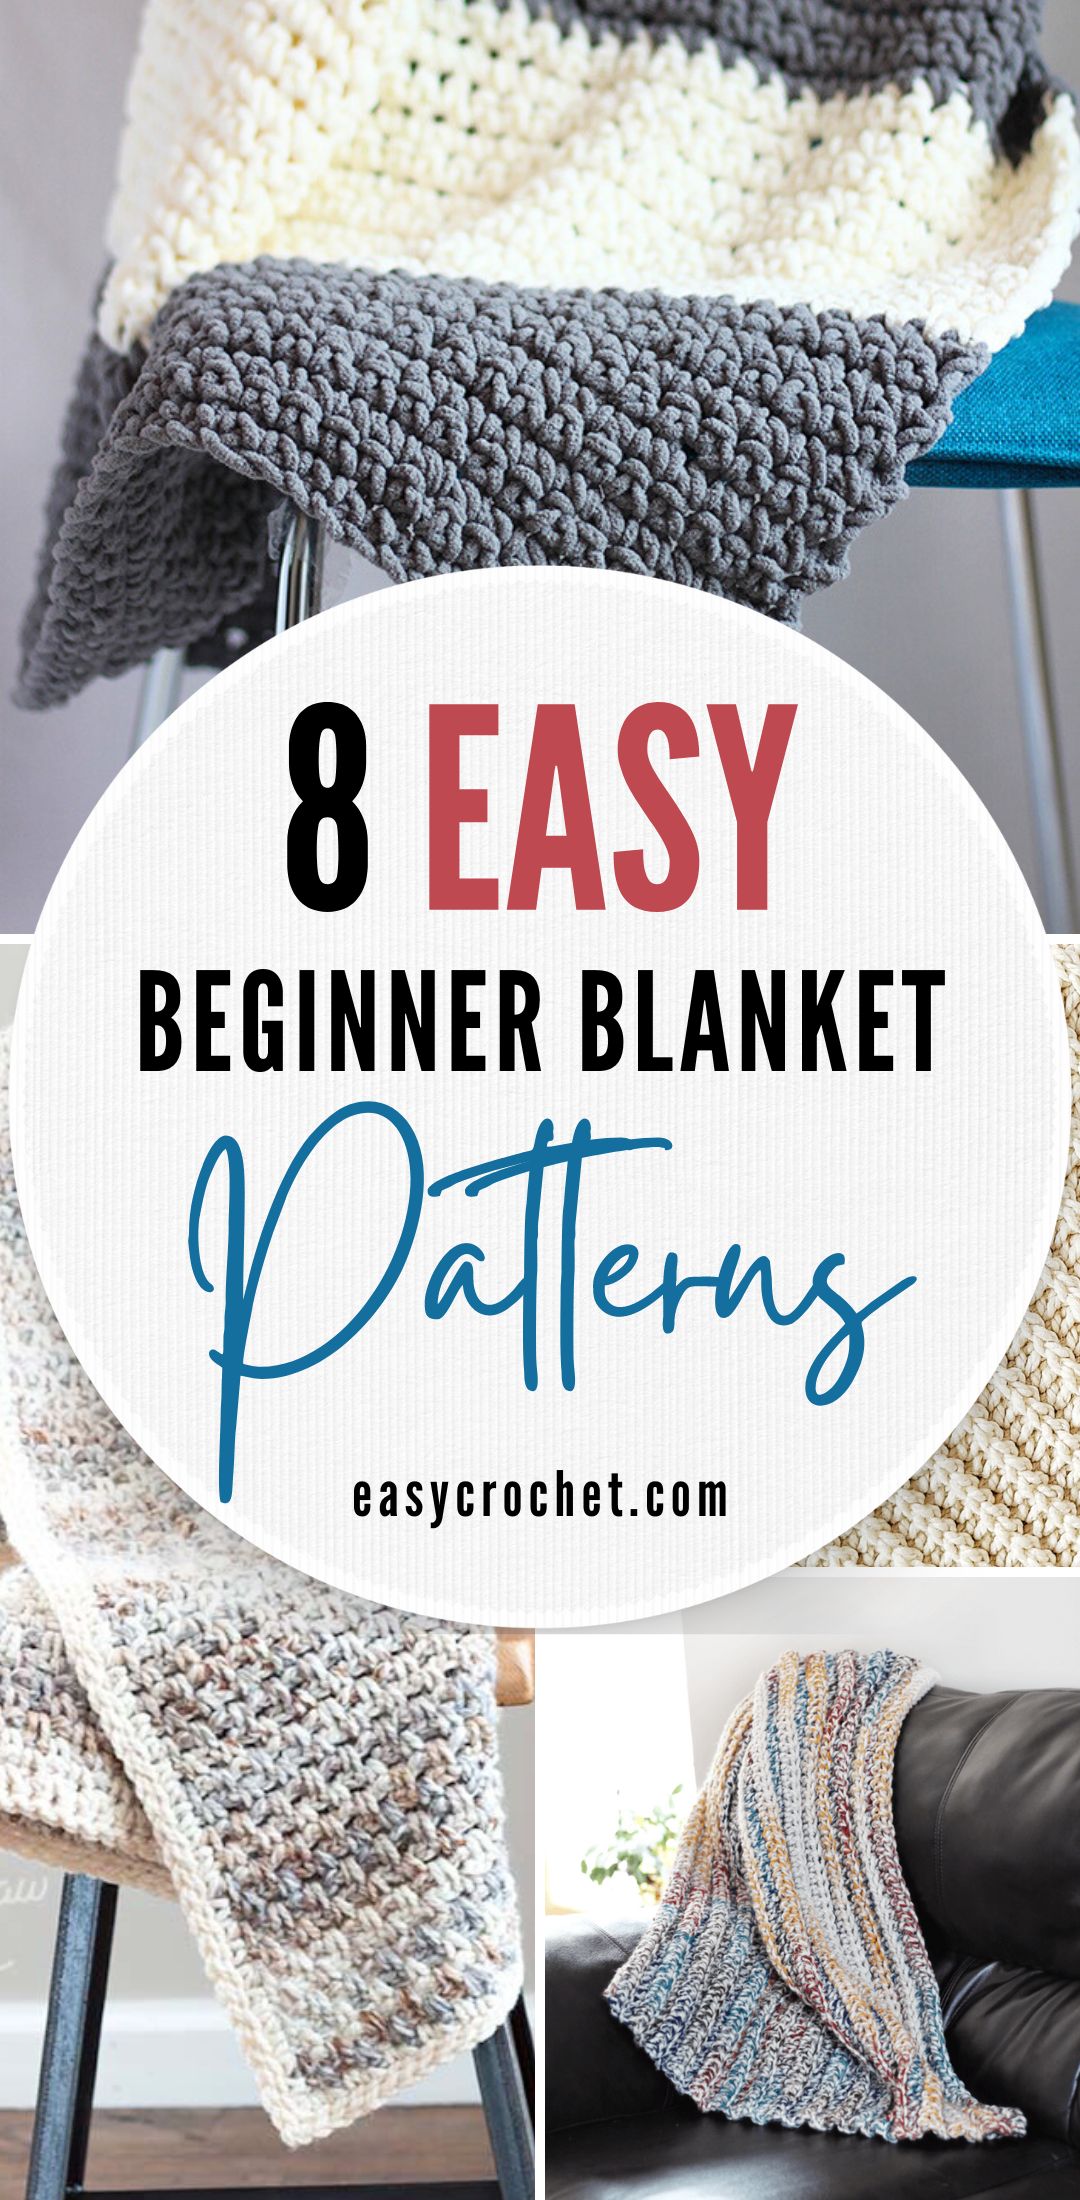 How to Crochet a Blanket (20+ Free & Easy Patterns)